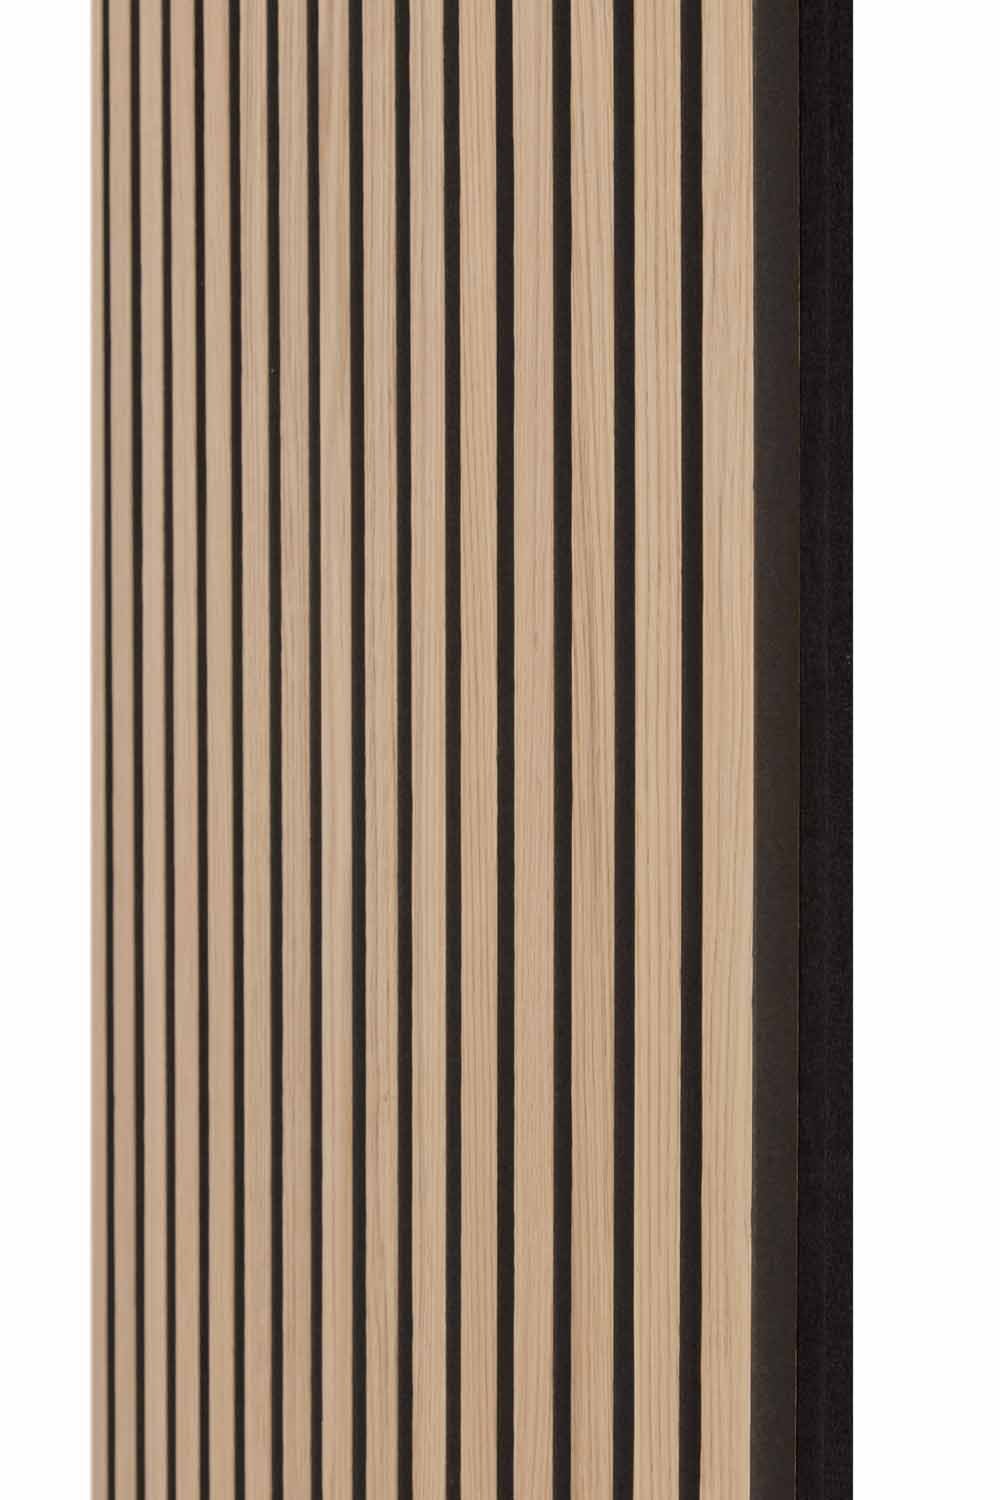 Side view of the Natural Oak and Black Acoustic SlatWall Panel from Naturewall, on felt backing. 

